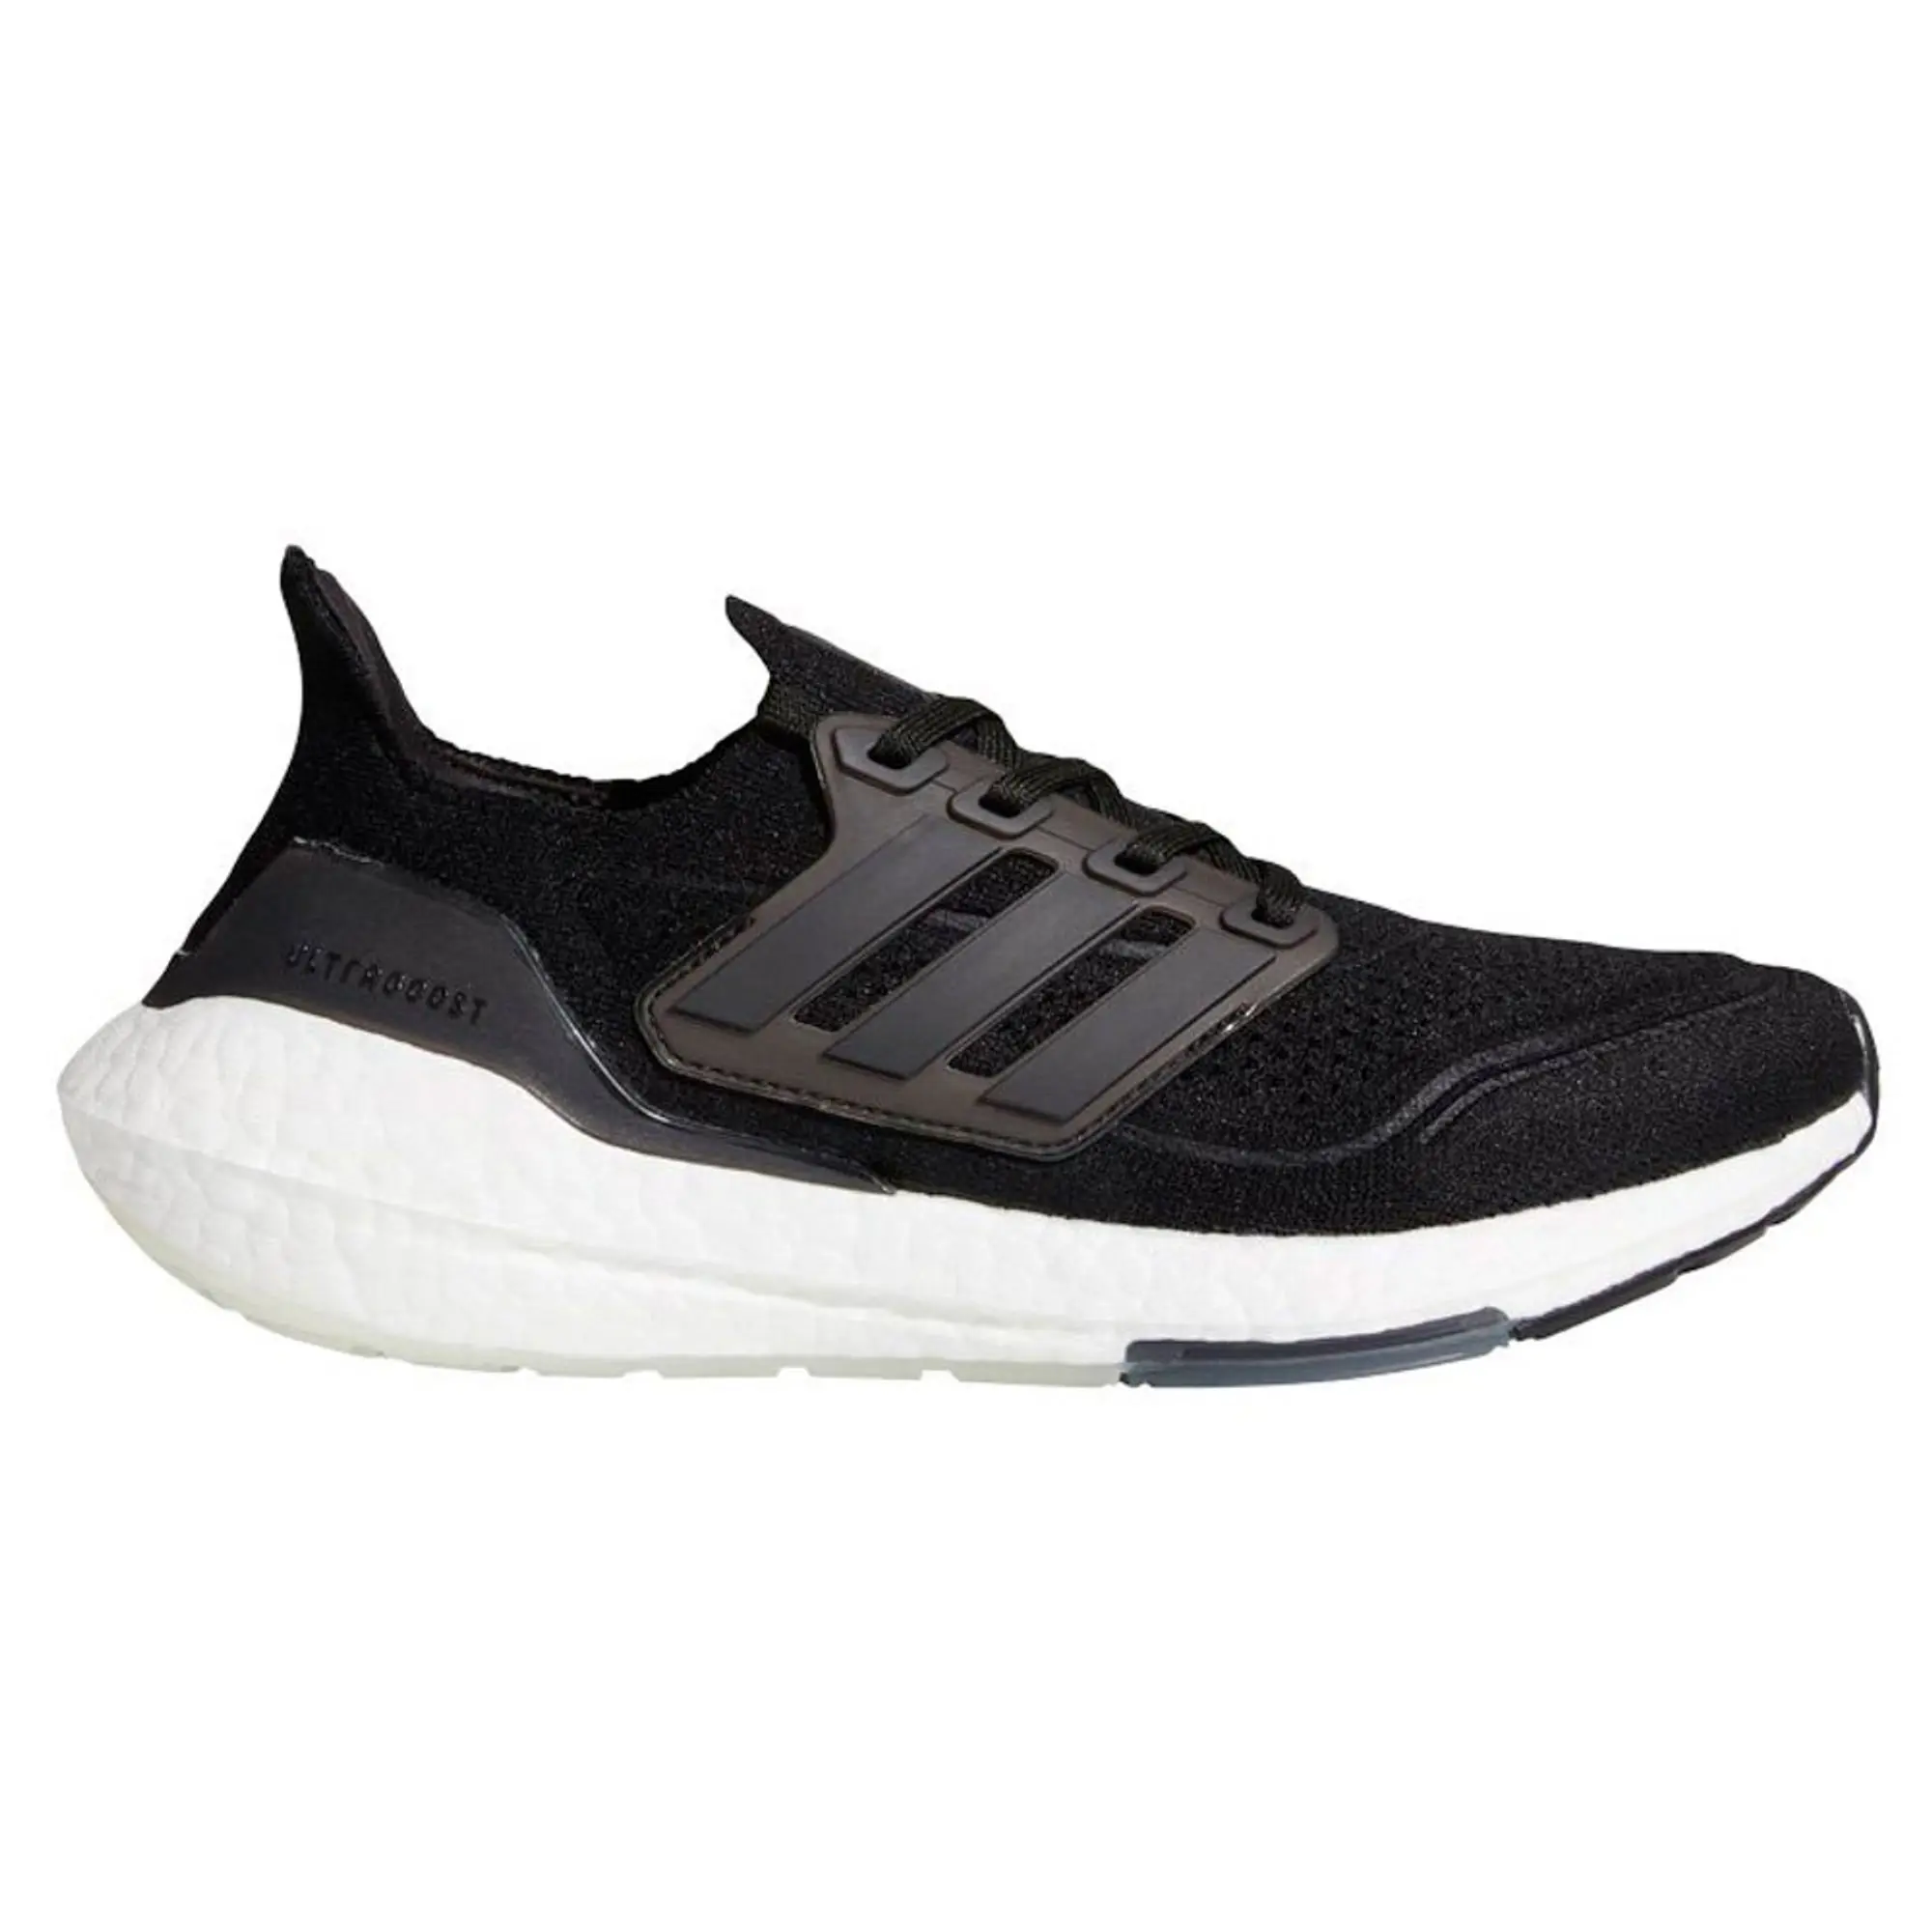 adidas Womenss Ultraboost 21 Running Shoes in Black Grey Textile